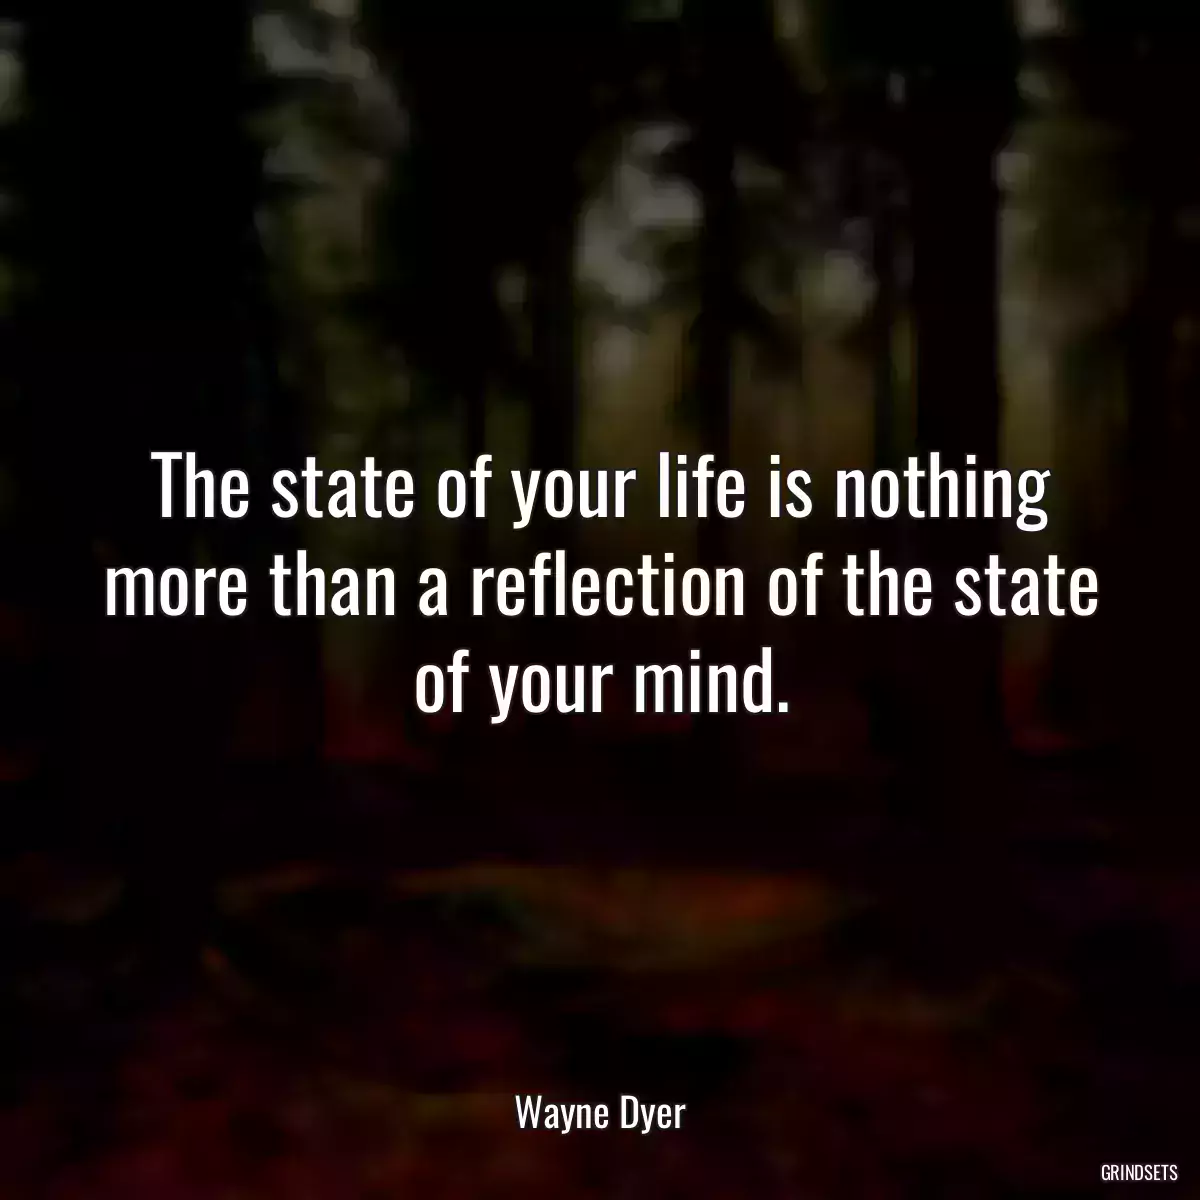 The state of your life is nothing more than a reflection of the state of your mind.